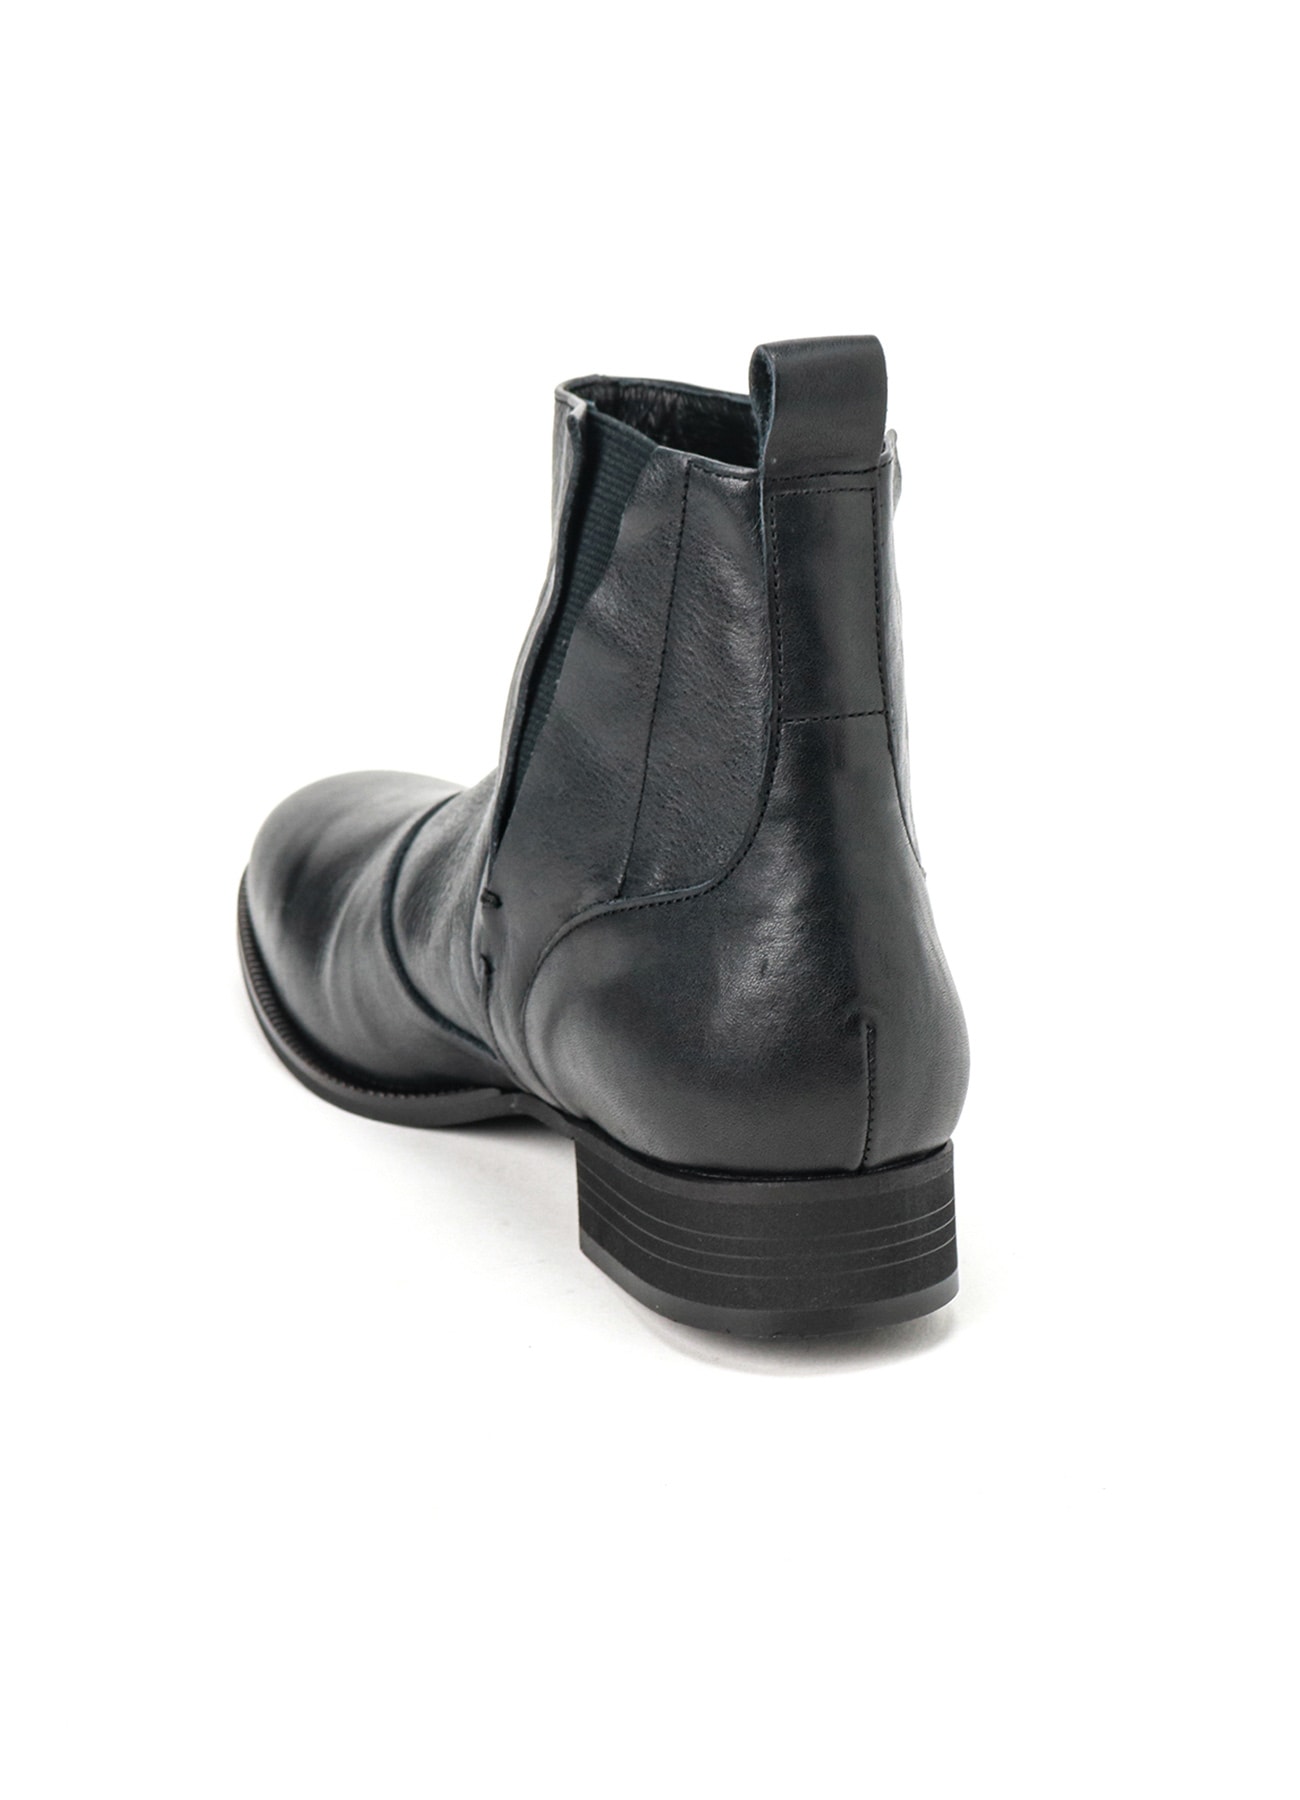 SEMI-GLOSS LEATHER SIDE GORE SHORT BOOTS